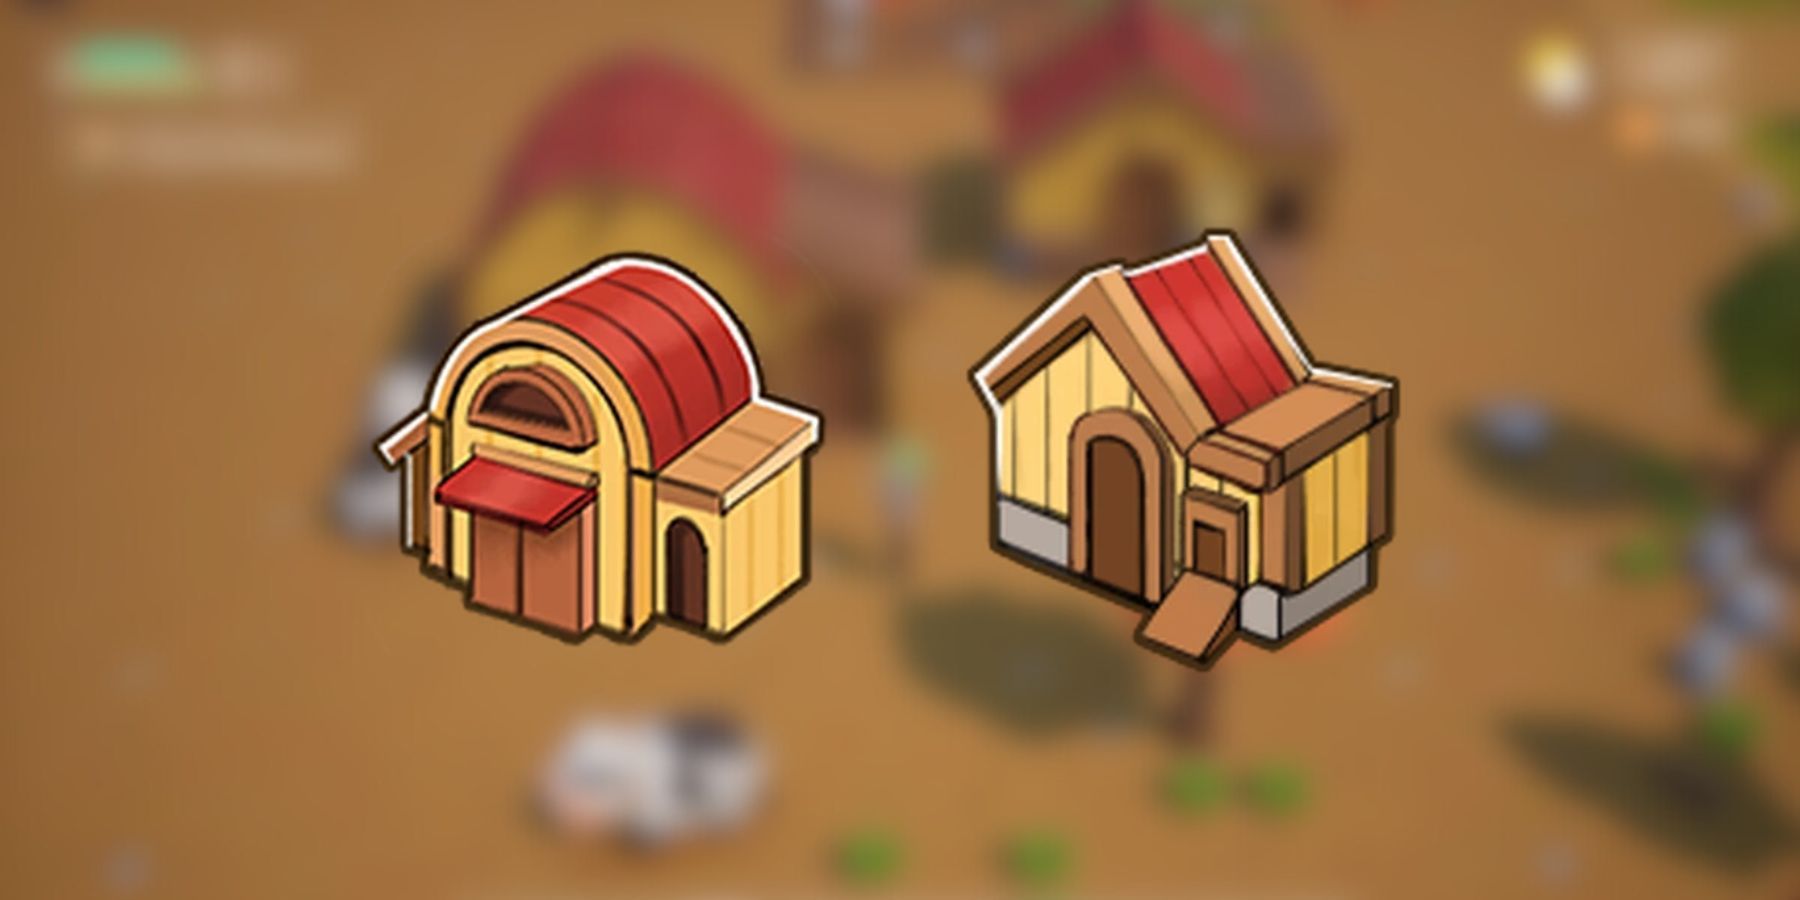 How to Build a Barn and Coop